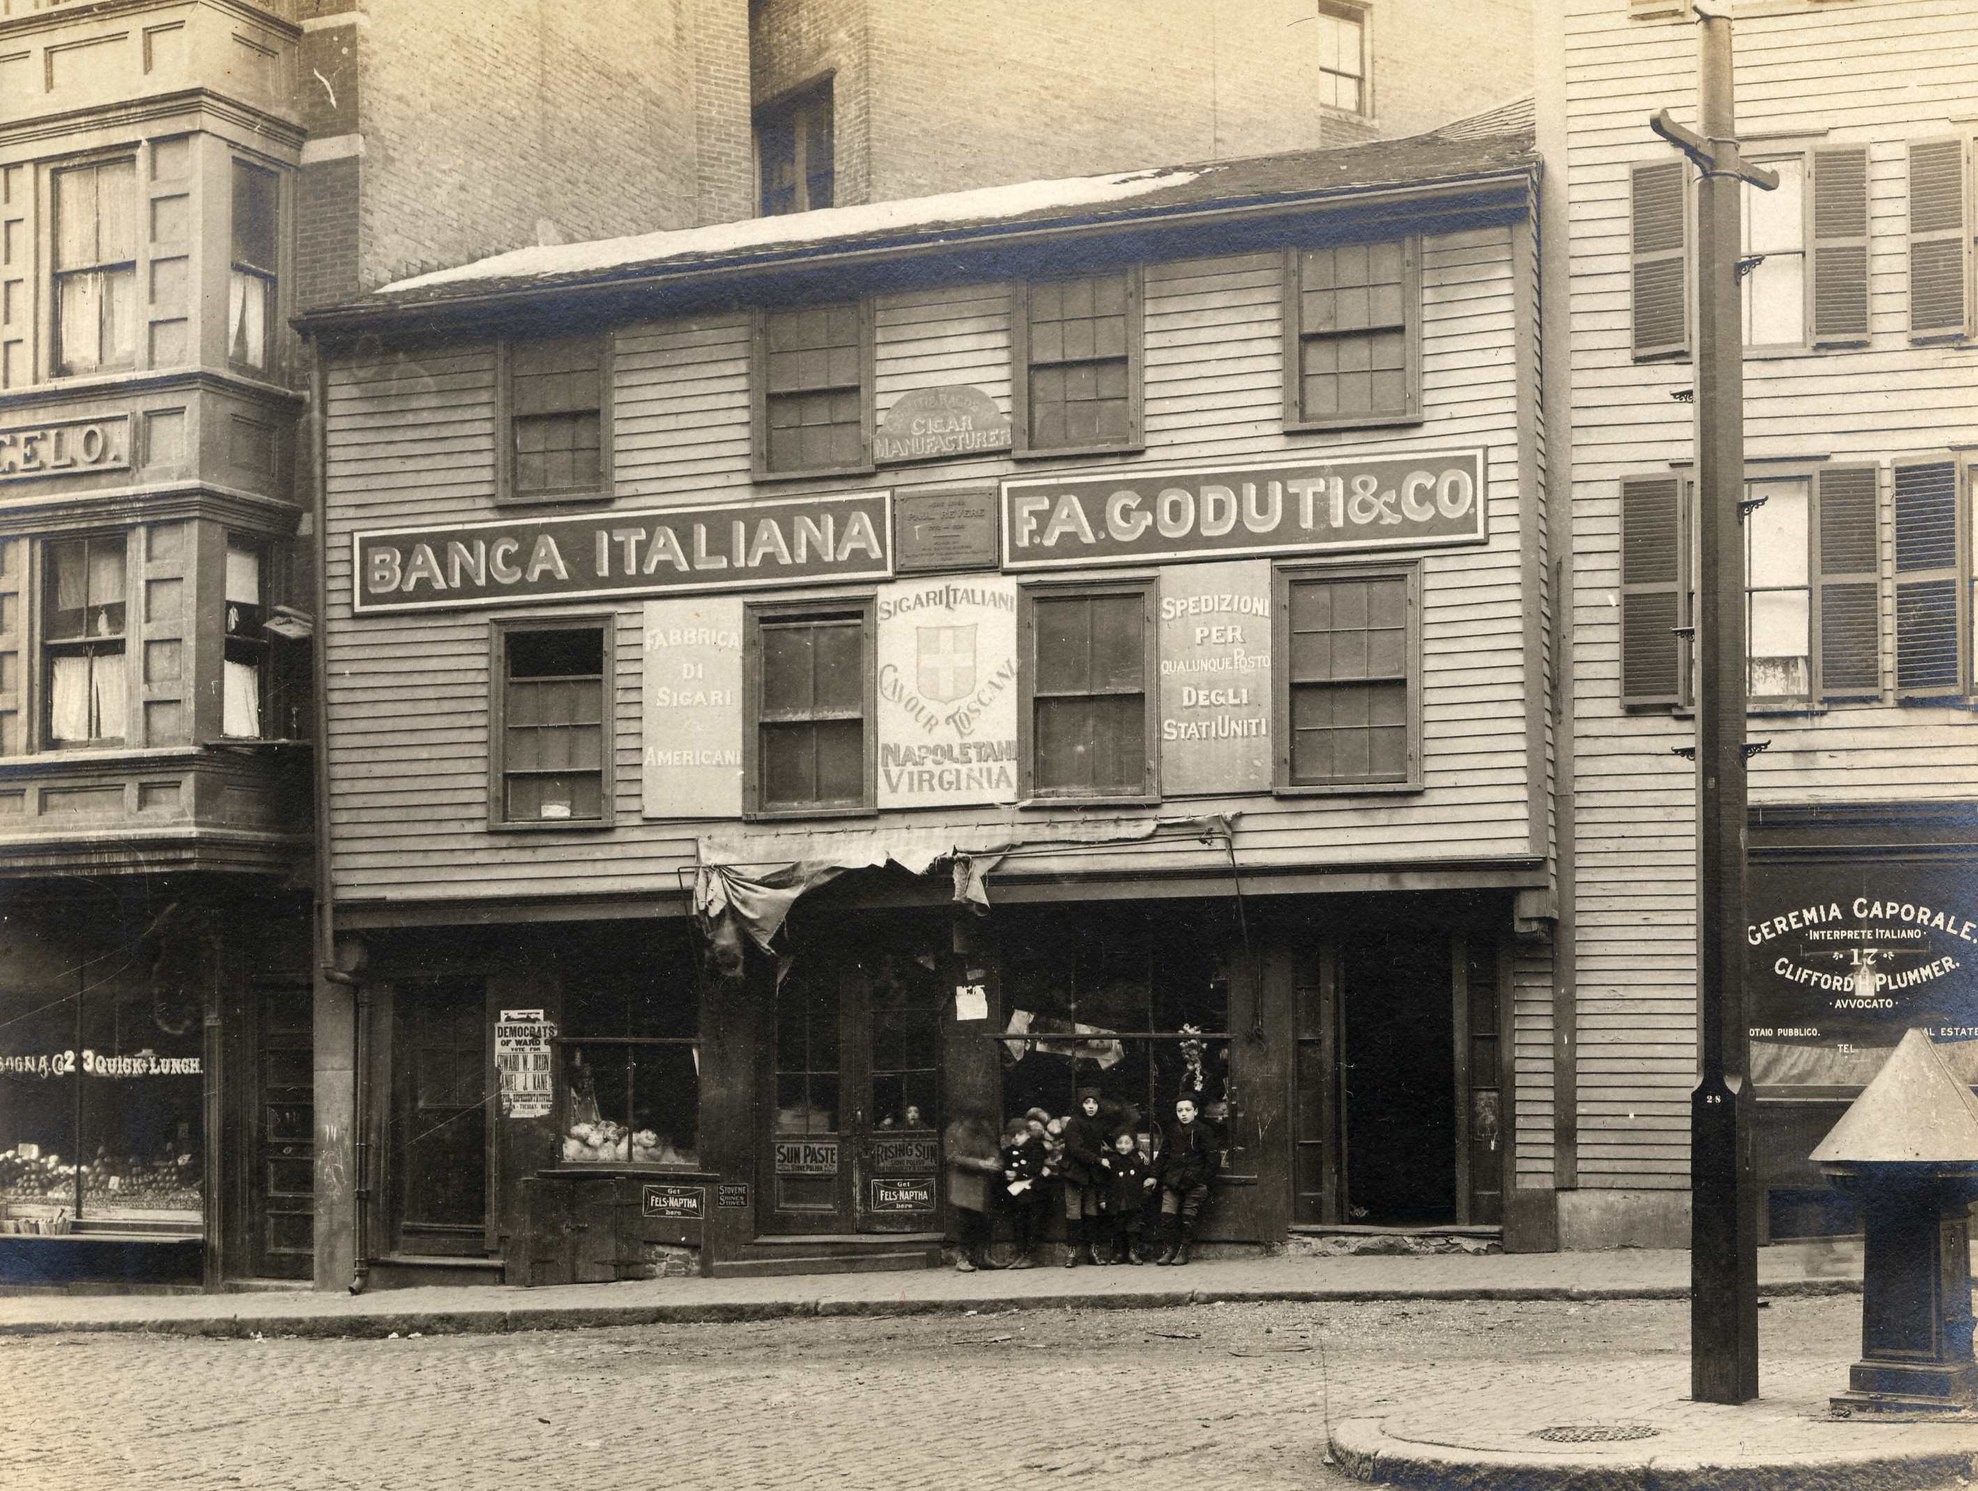 Black and white image of a three story wooden building with windows on the second and third floor. First floor has store fronts with a group of children standing in front of them